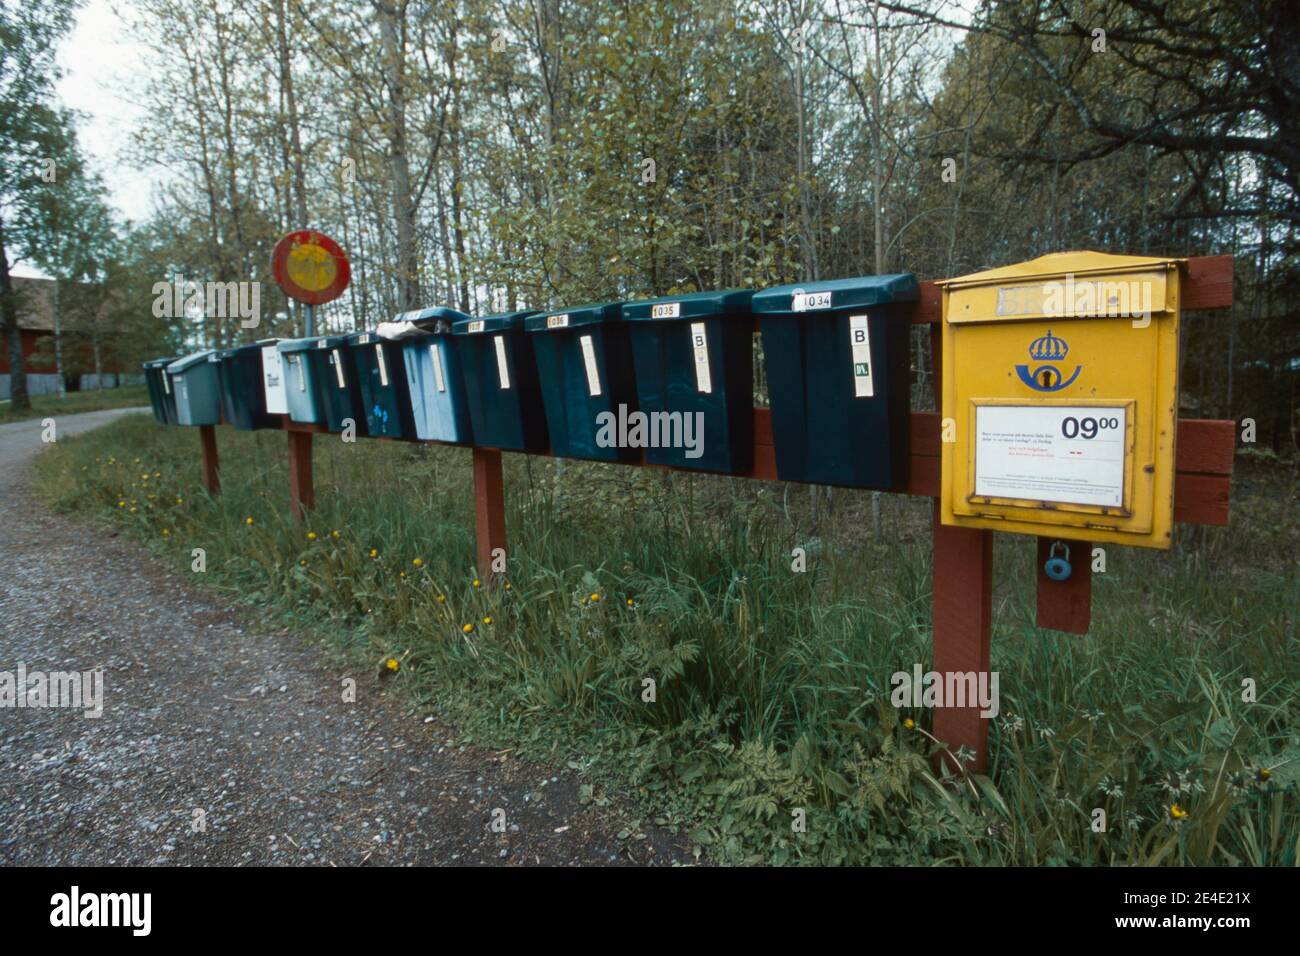 Country road with mailboxes. Stock Photo